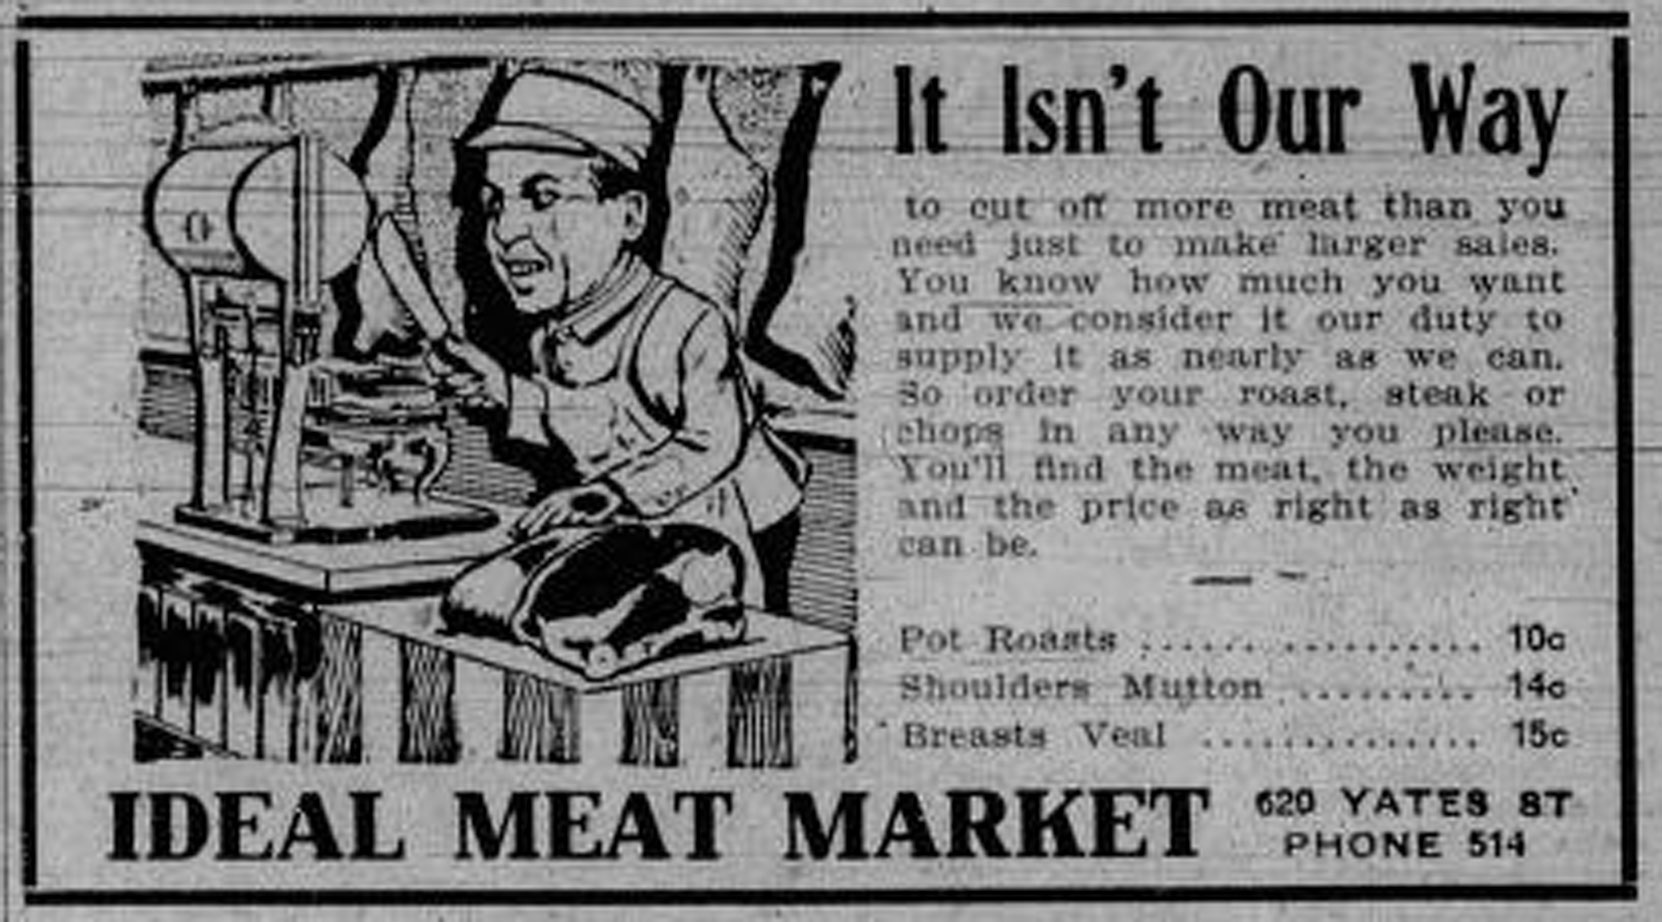 1910 advertisement for Ideal Meat Market, 620 Yates Street (Victoria Online Sightseeing Tours collection)